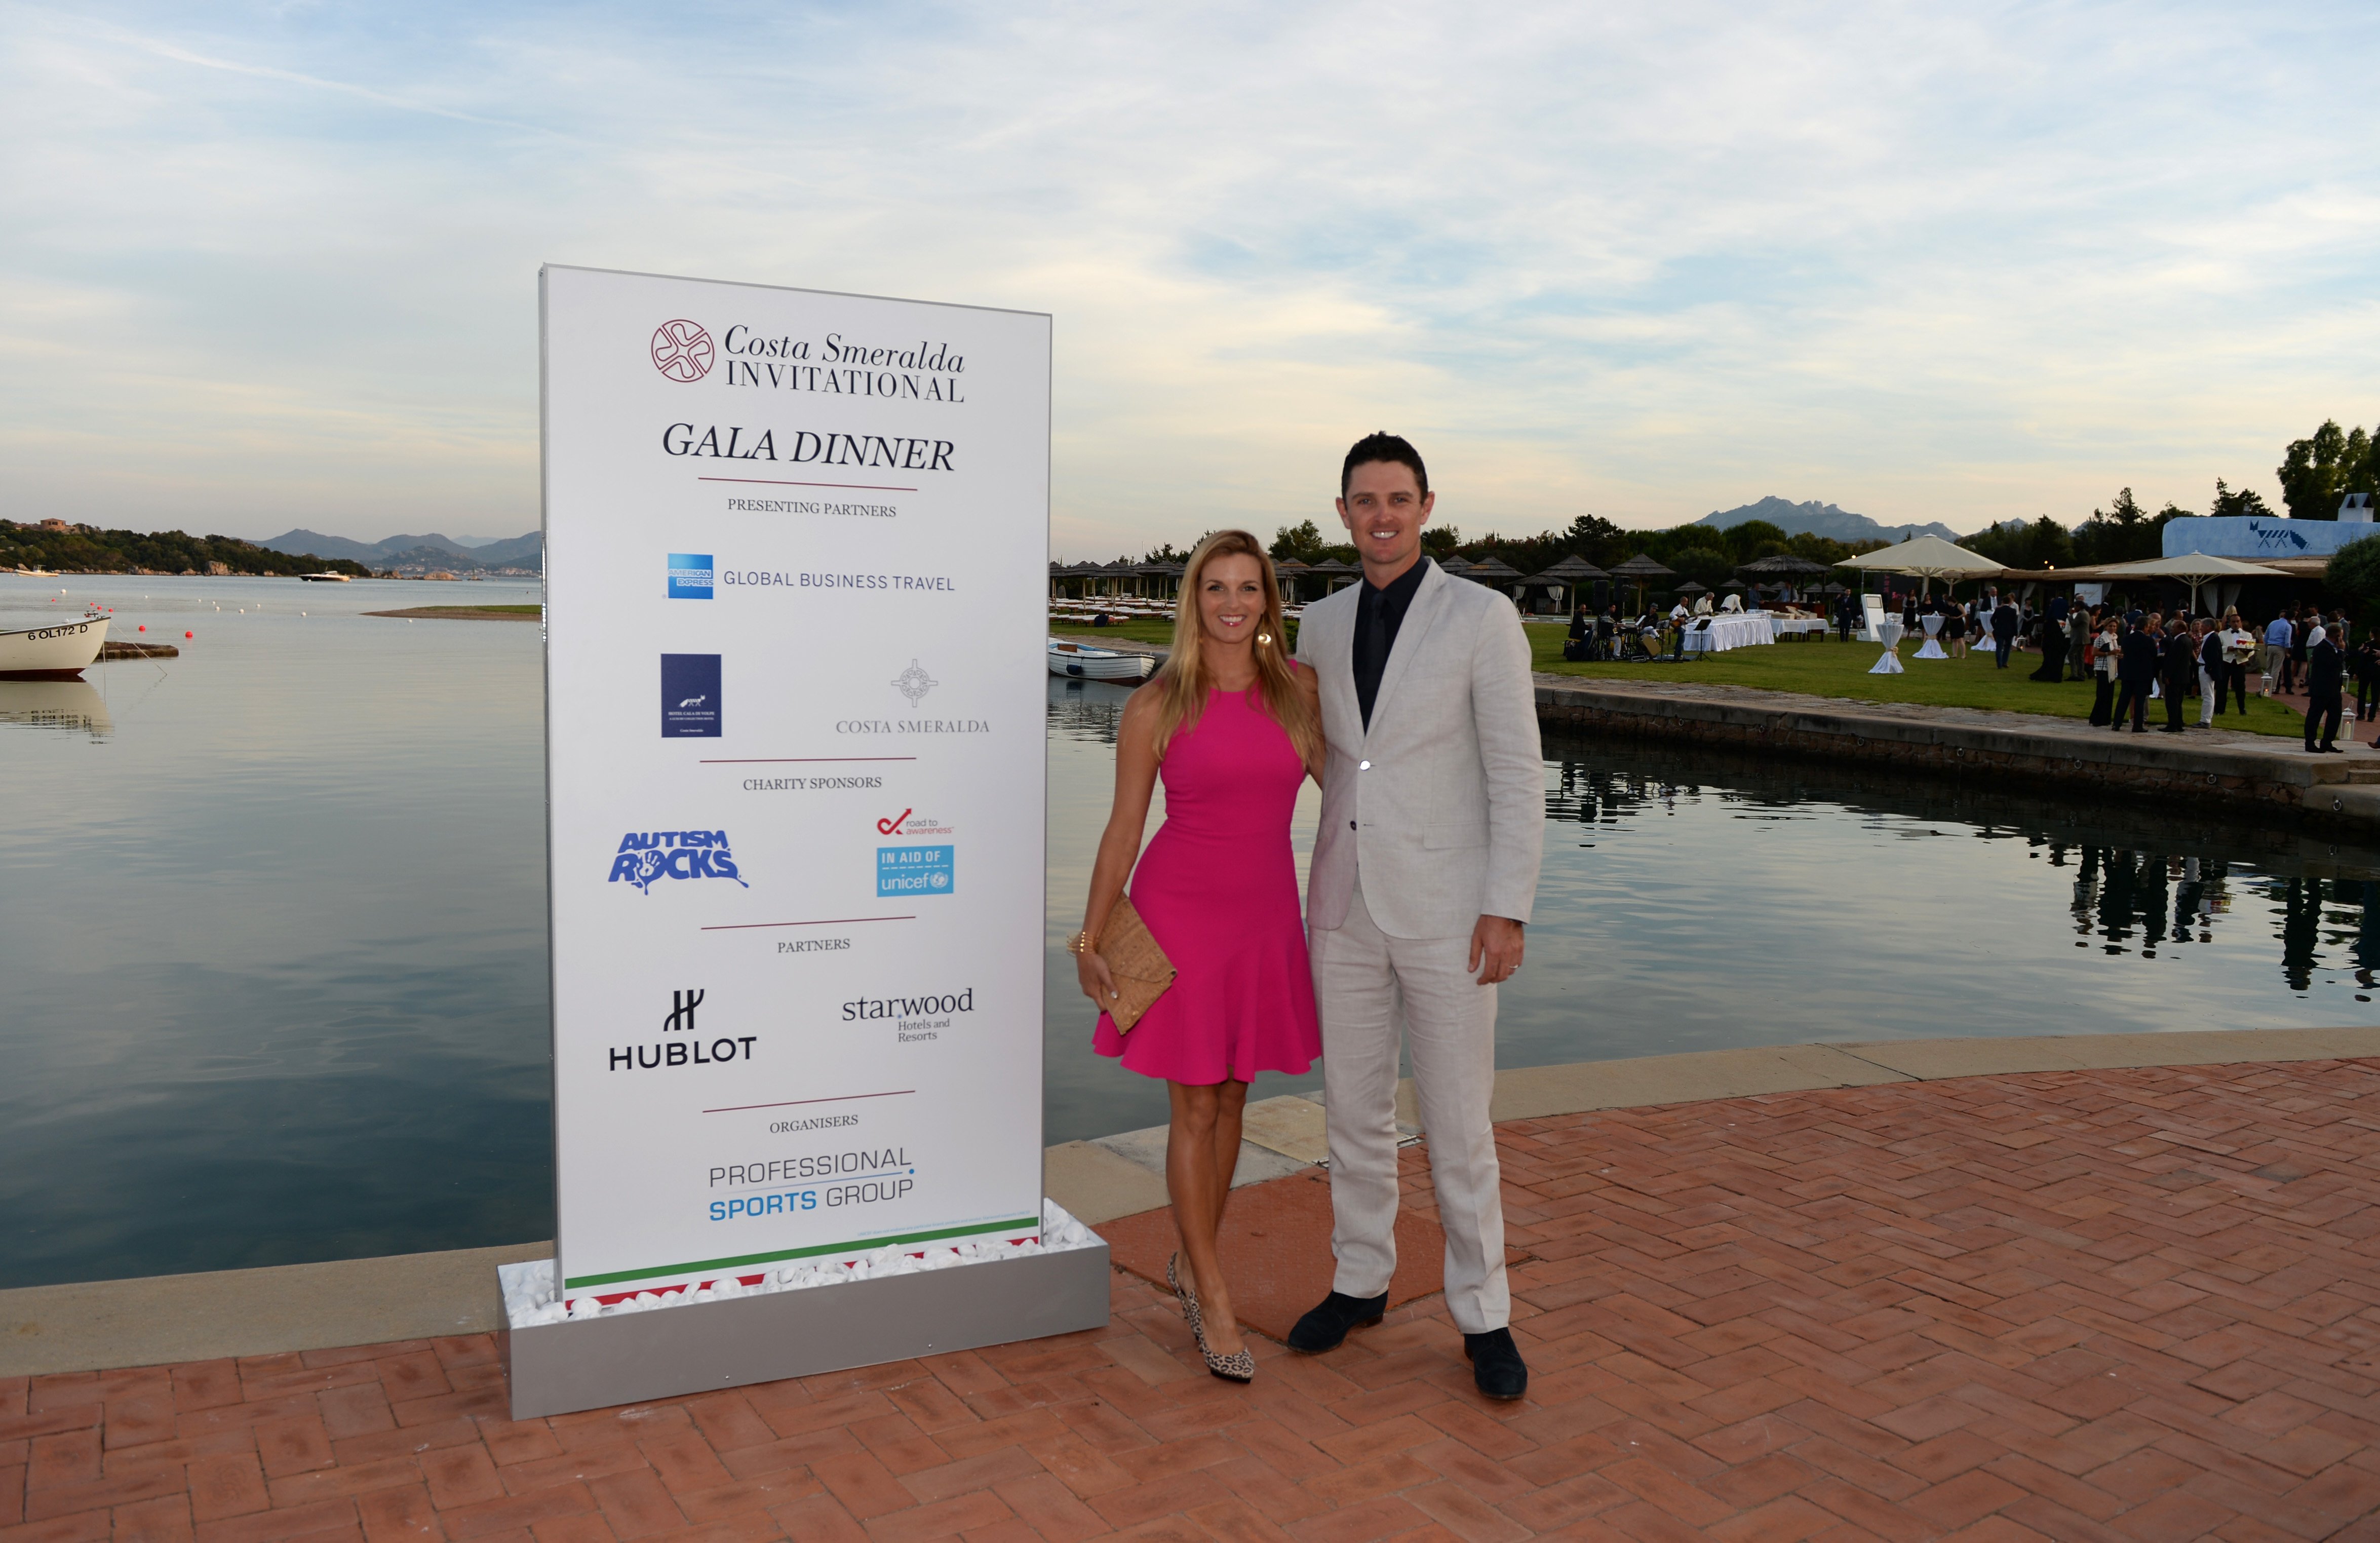 Justin and Kate Rose at the Gala Dinner following The Costa Smeralda Invitational Golf Tournament at Pevero Golf Club, Costa Smeralda on June 27, 2015, in Olbia, Italy | Source: Getty Images